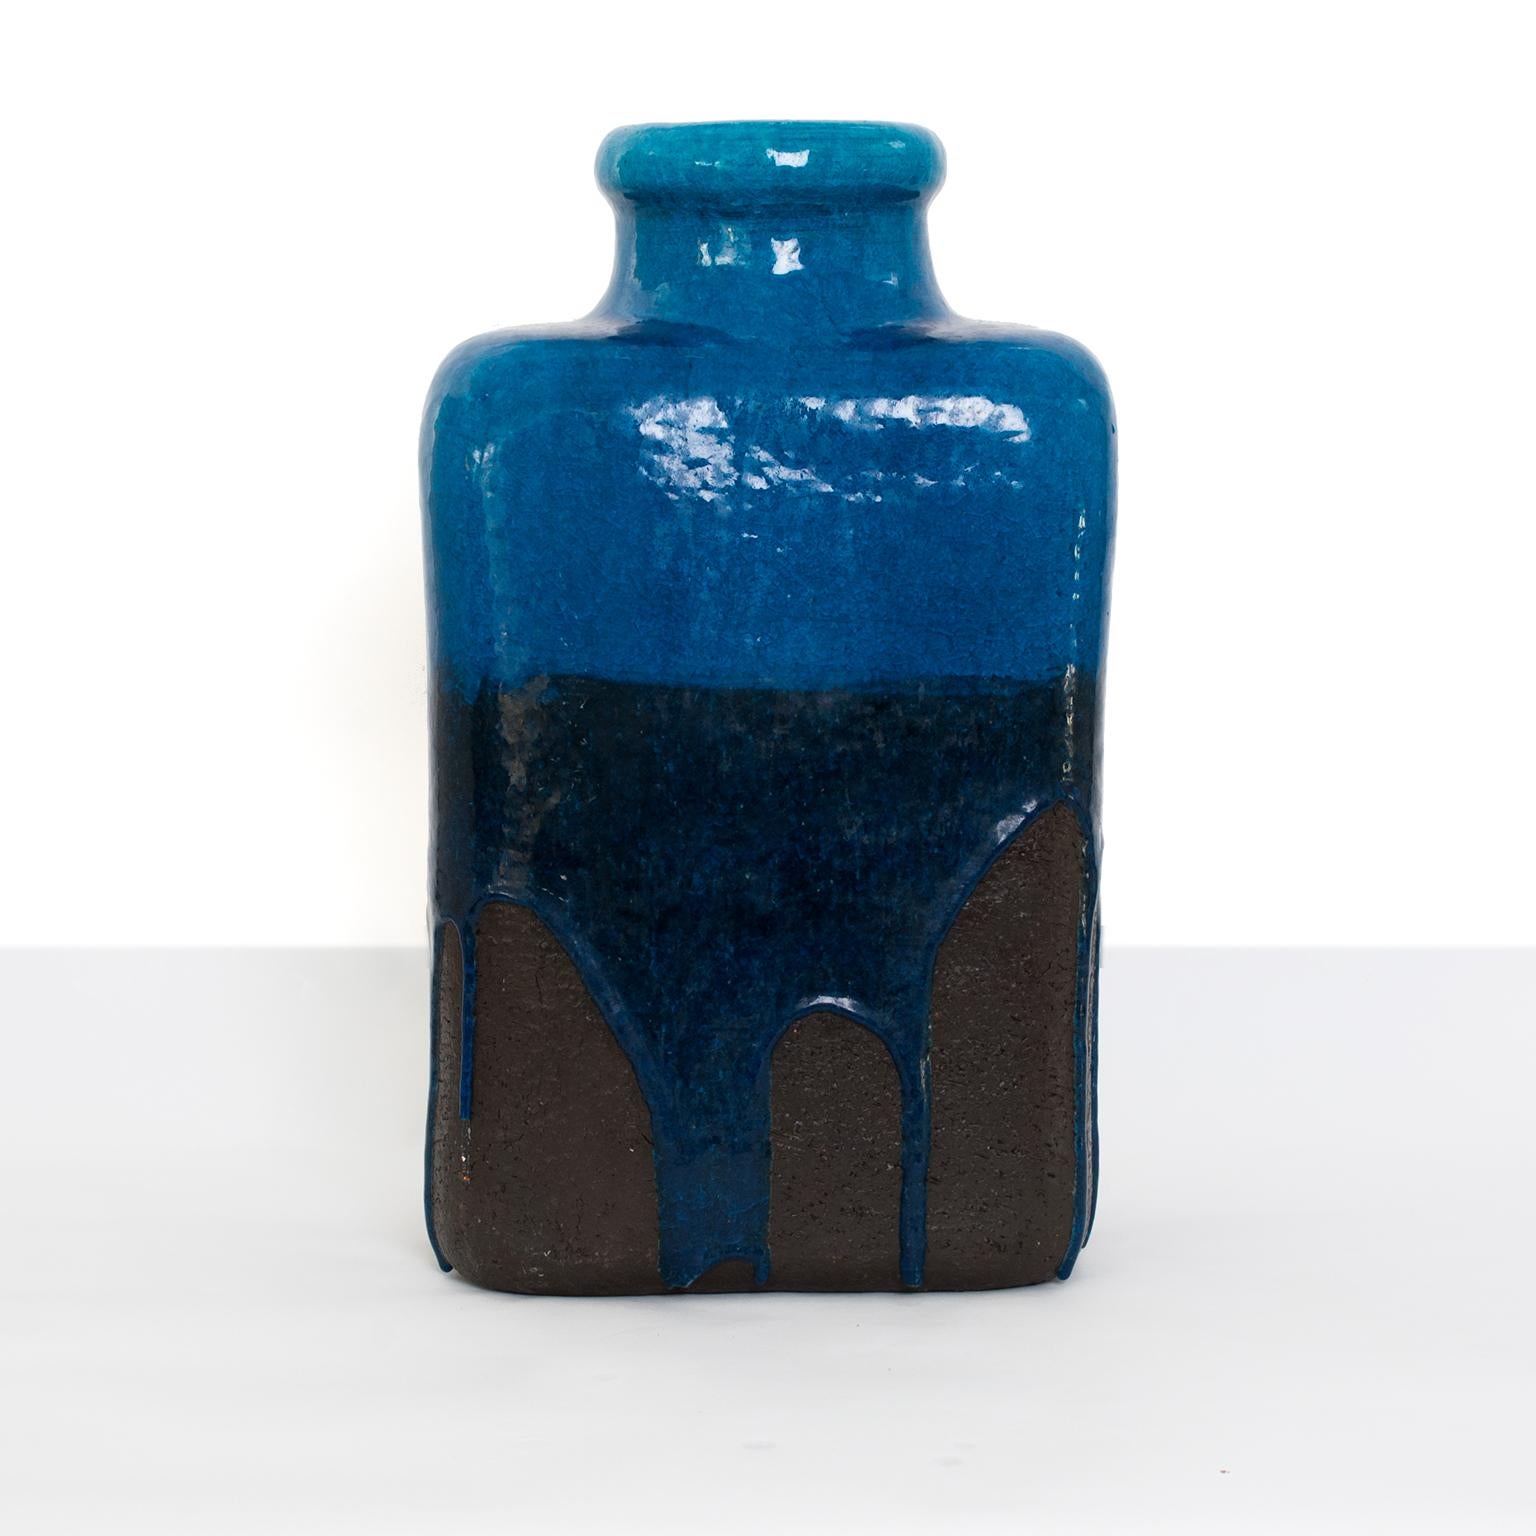 Massive Scandinavian Modern ceramic vase from Denmark. The vase is partially glaze in a deep blue color over a dark earthy brown clay with drips on all sides. Measures: Height 19.5